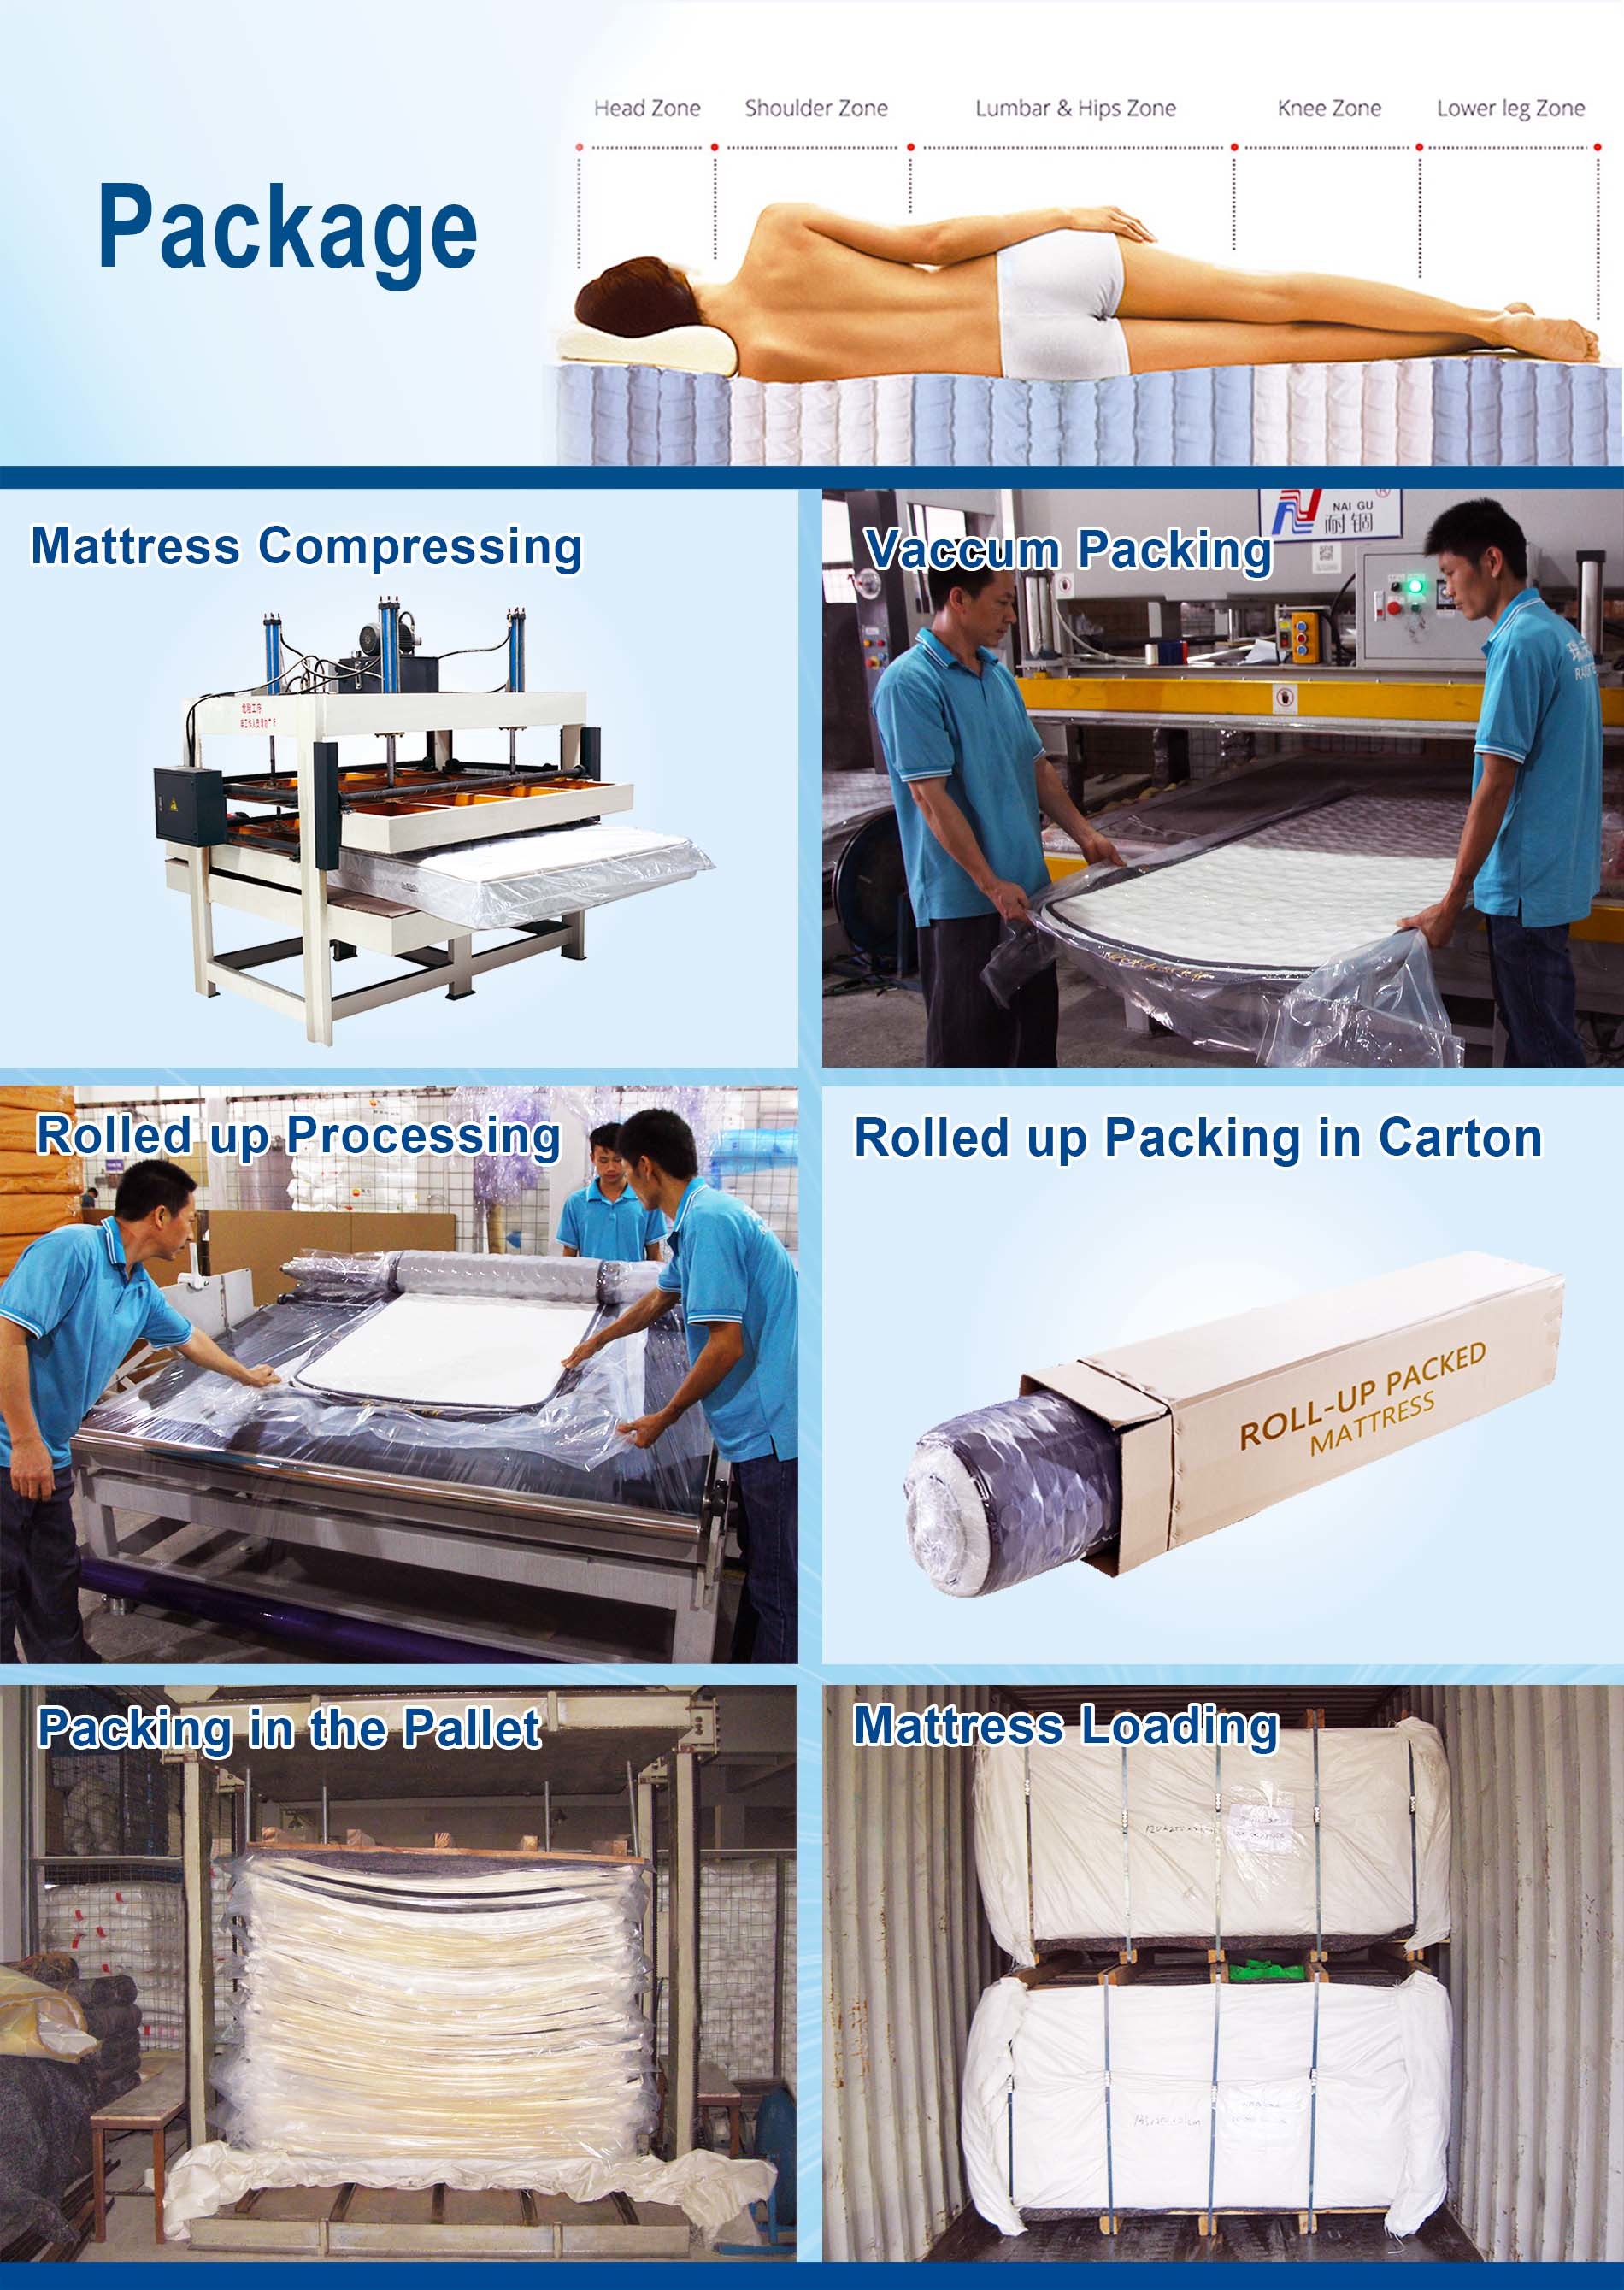 size spring king Synwin Brand roll up mattress queen manufacture